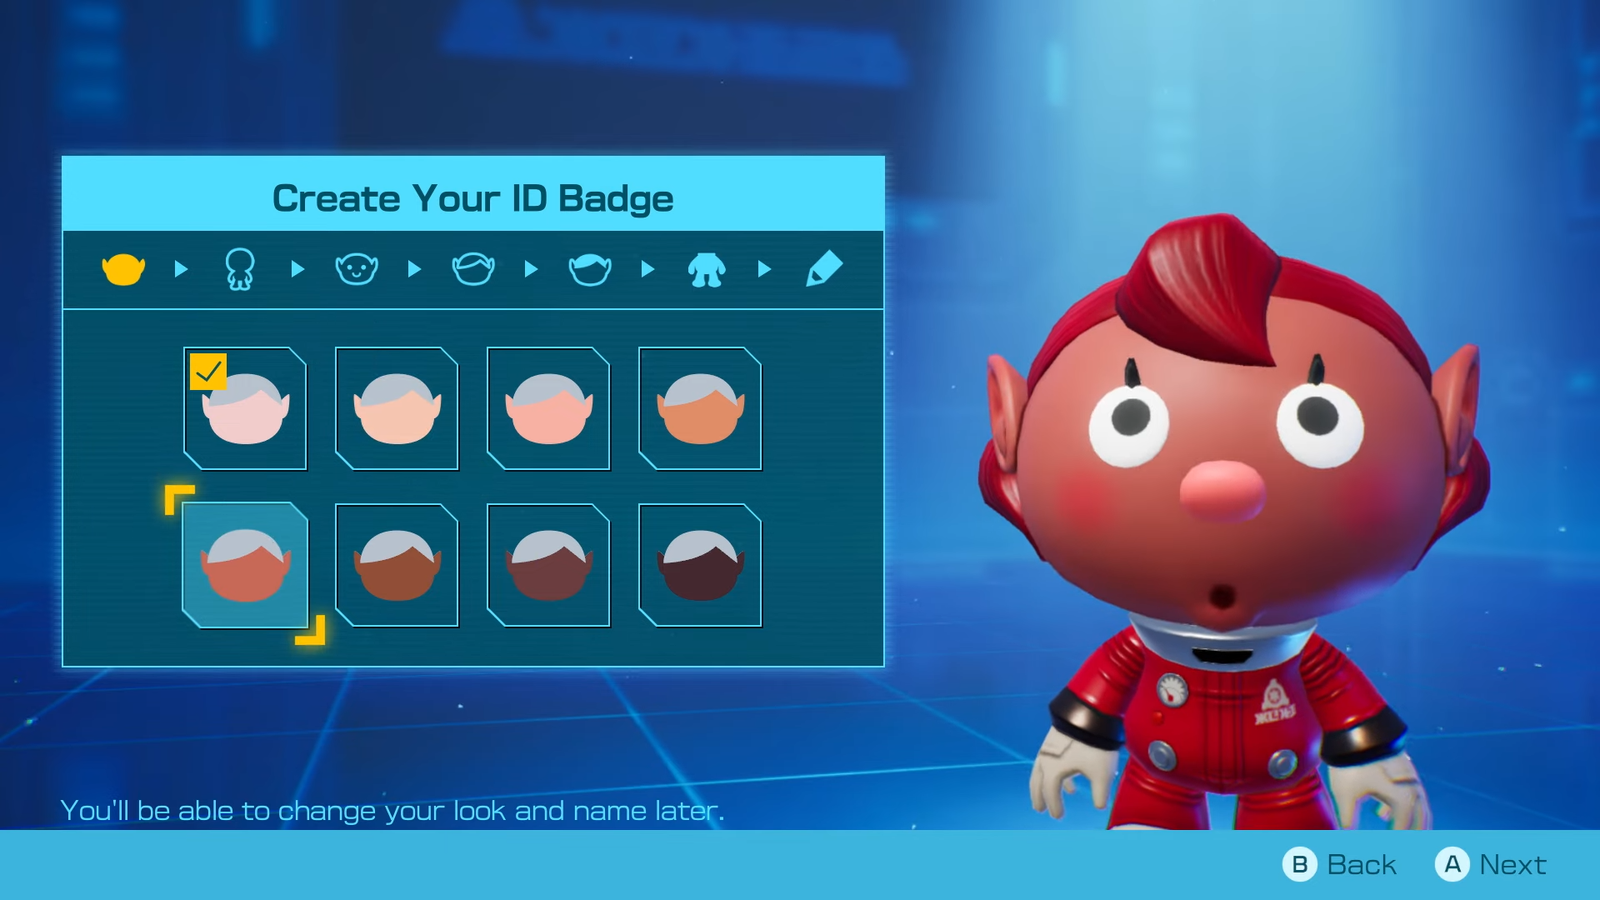 will let Pikmin your own character you 4 create